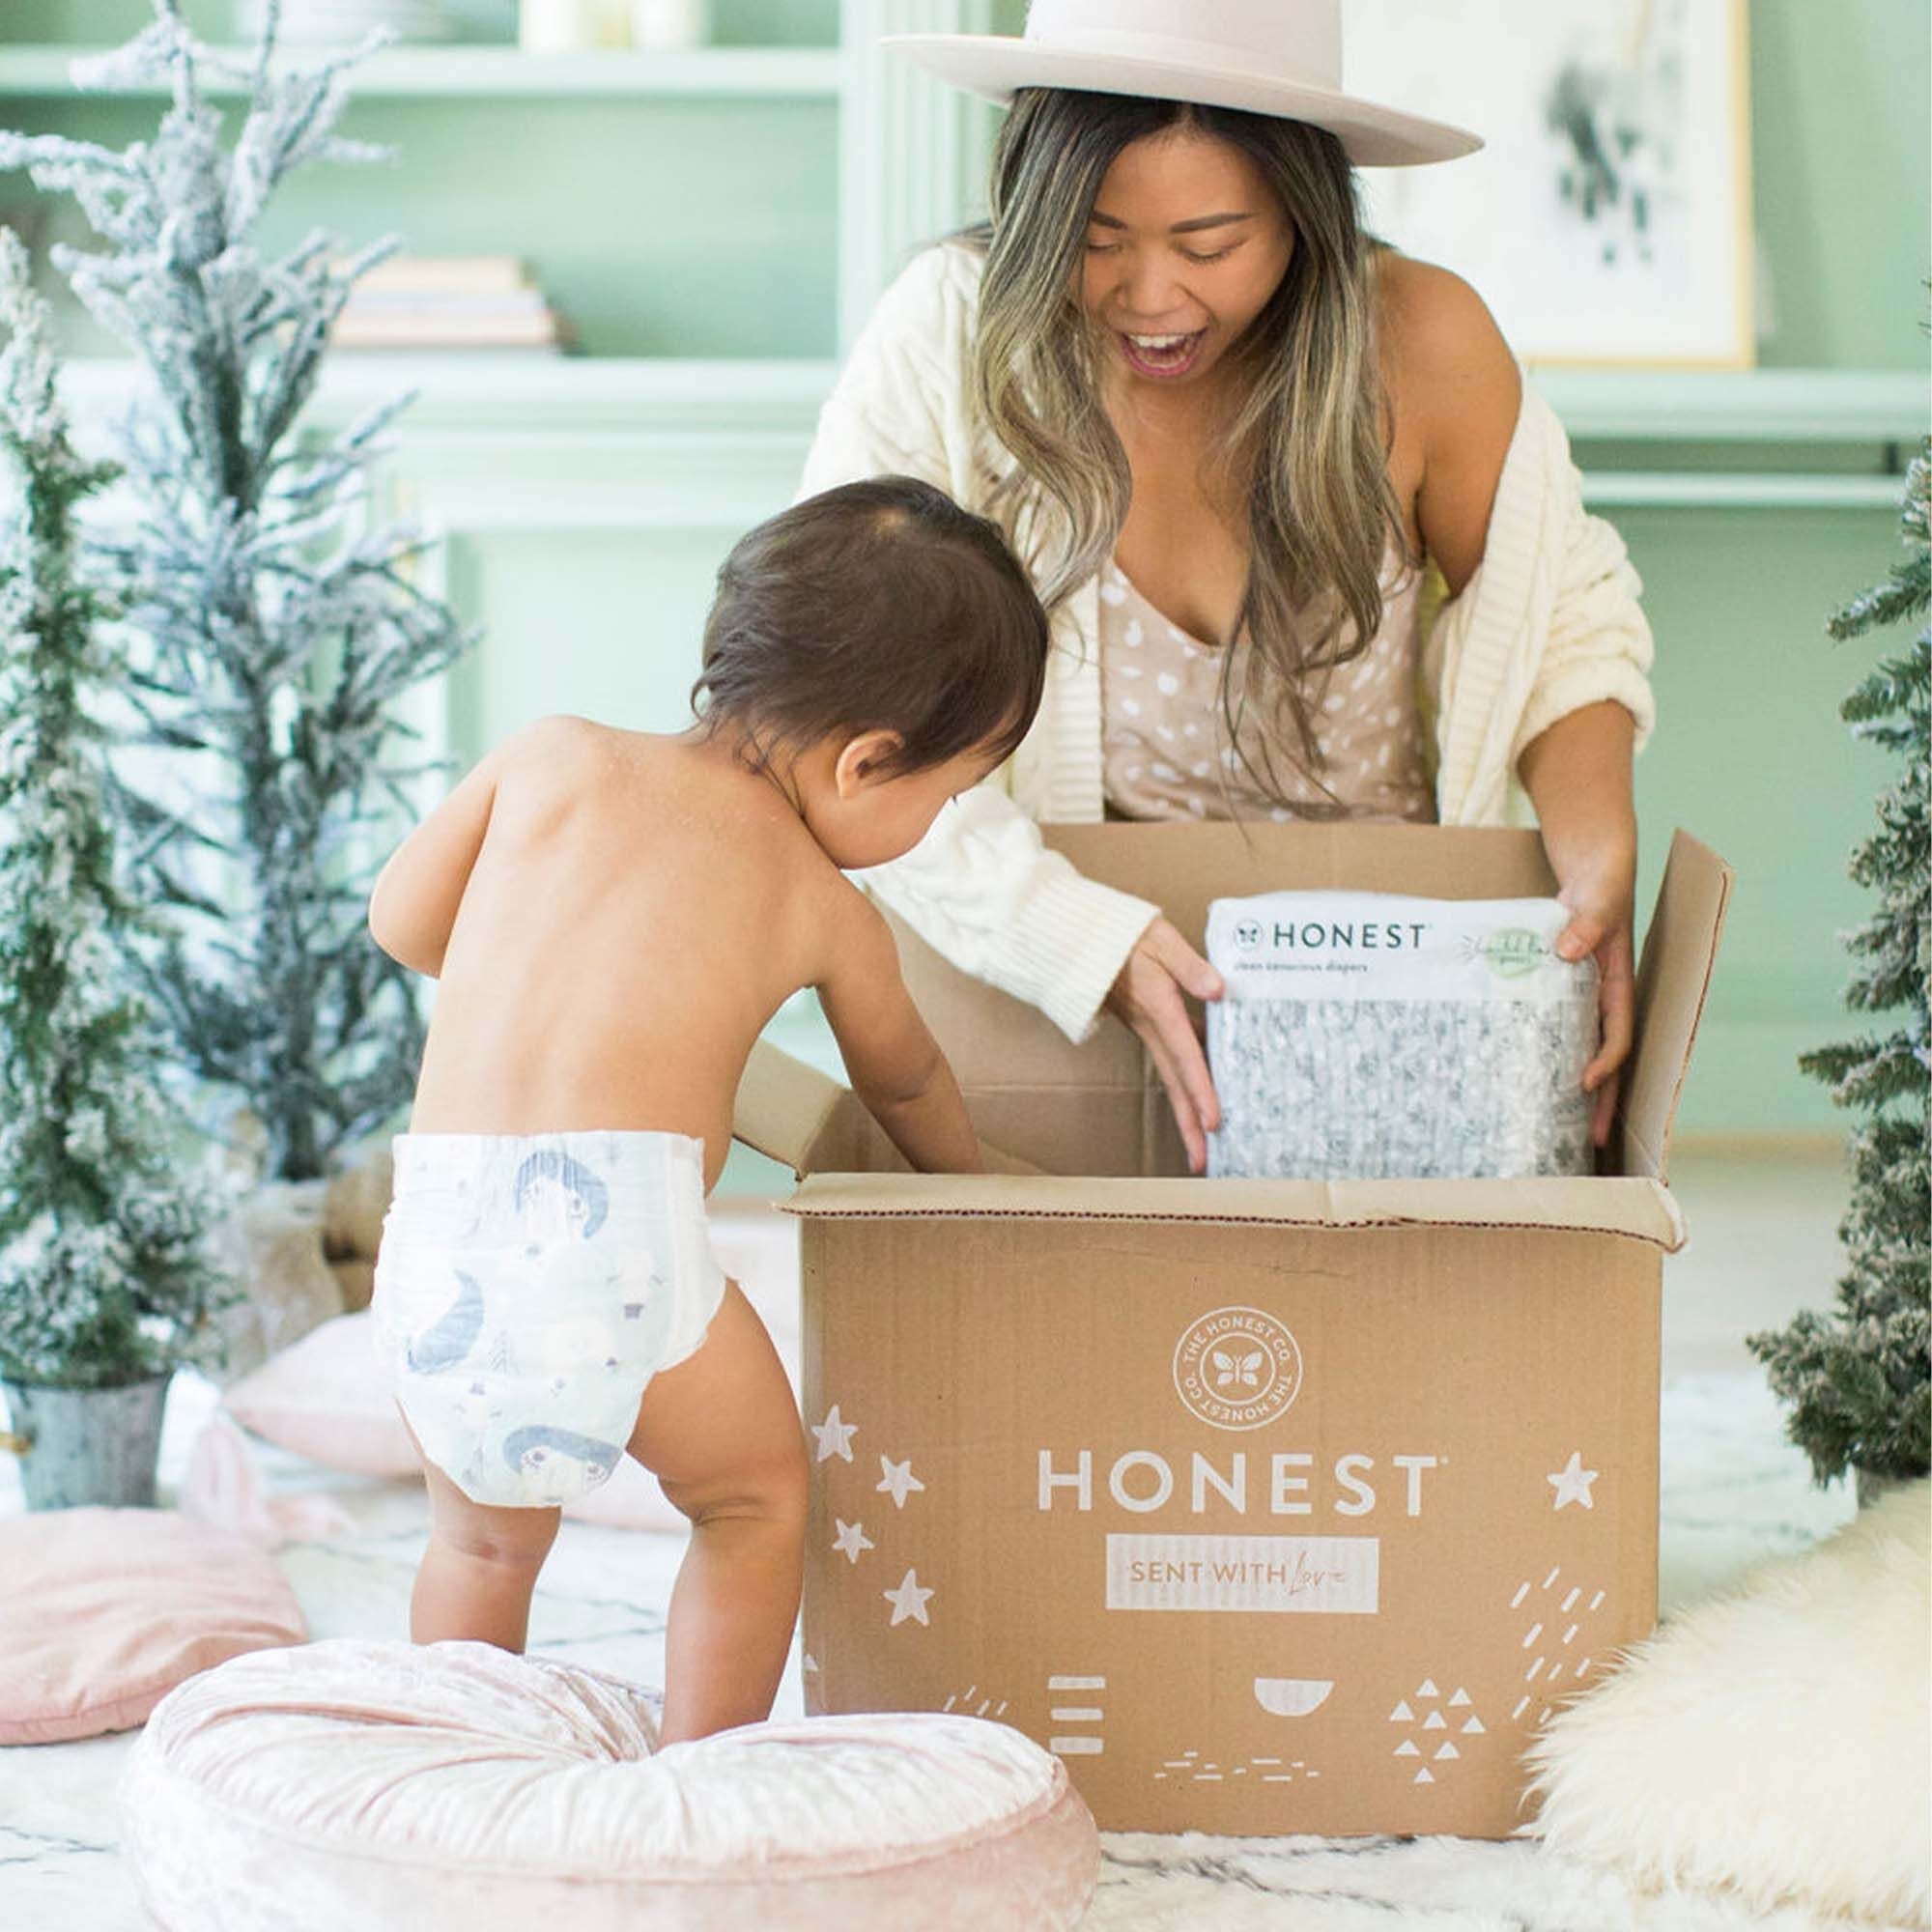 A parent and baby wearing a diaper pulling diapers out of a box